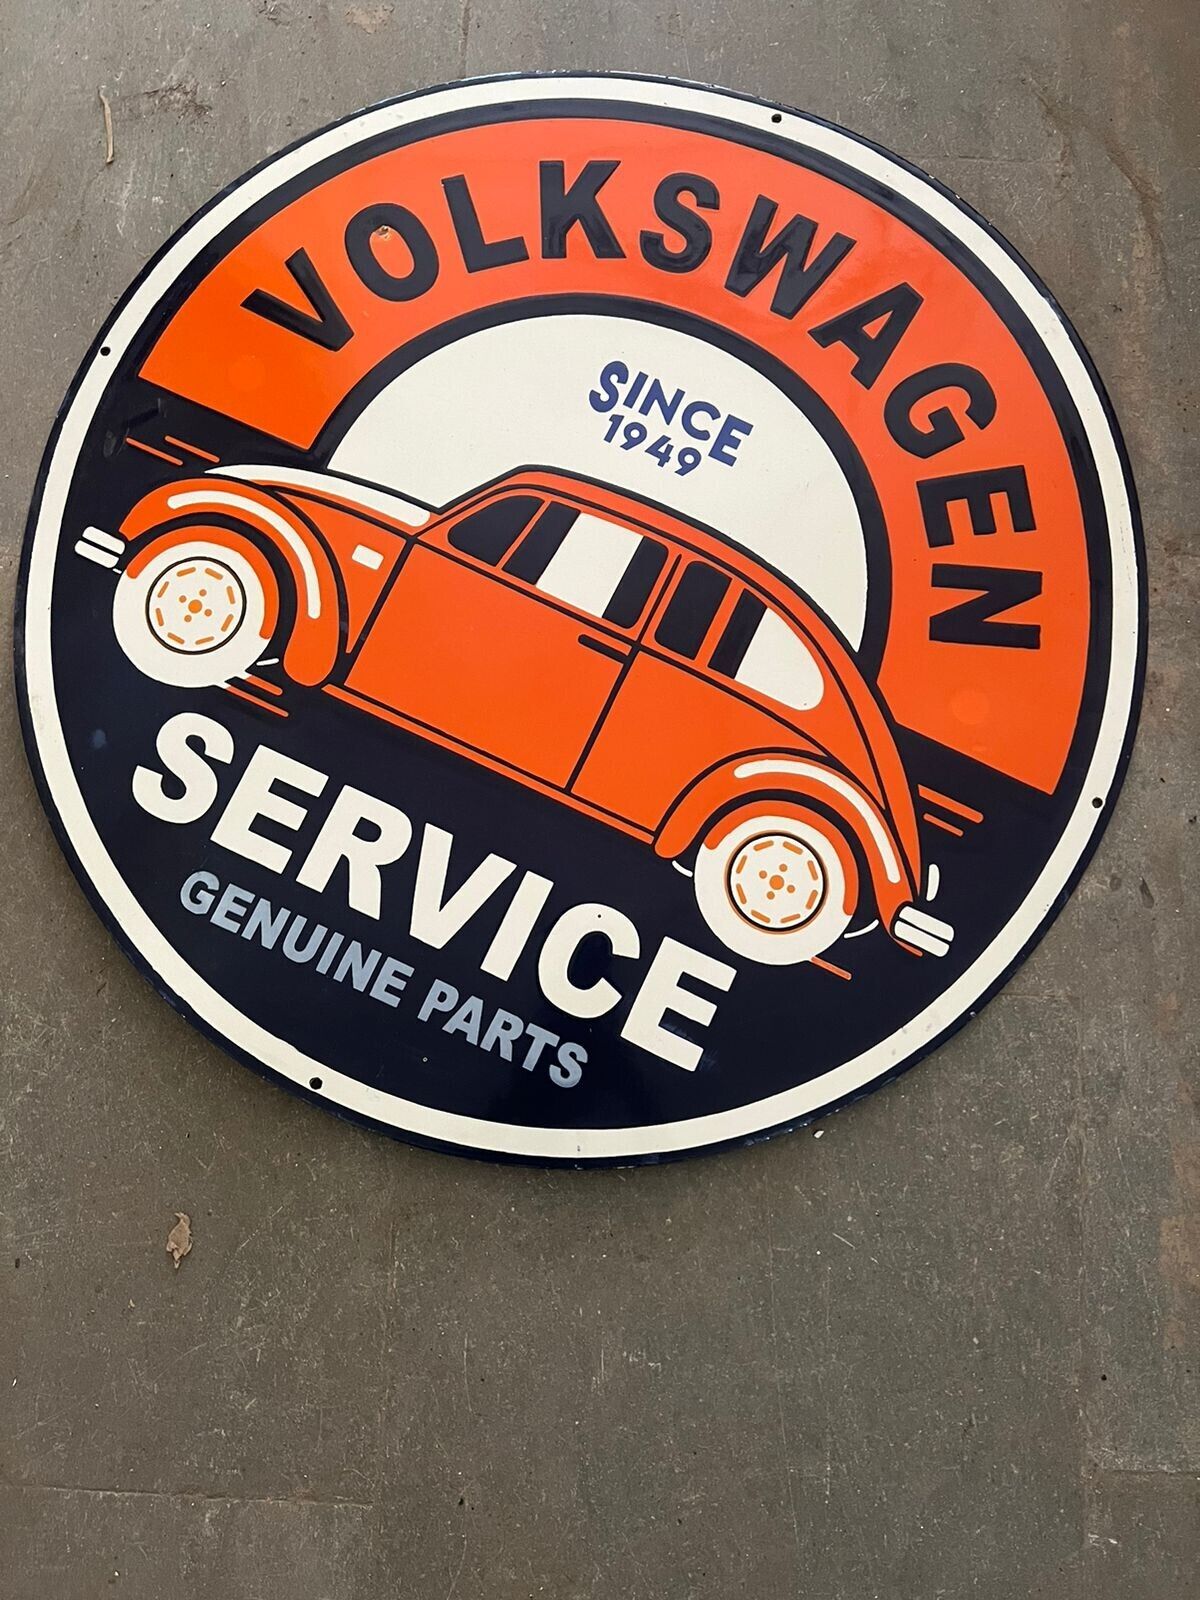 RARE PORCELAIN VOLKSWAGEN SERVICE ENAMEL SIGN 36X36 INCHES DOUBLE SIDED